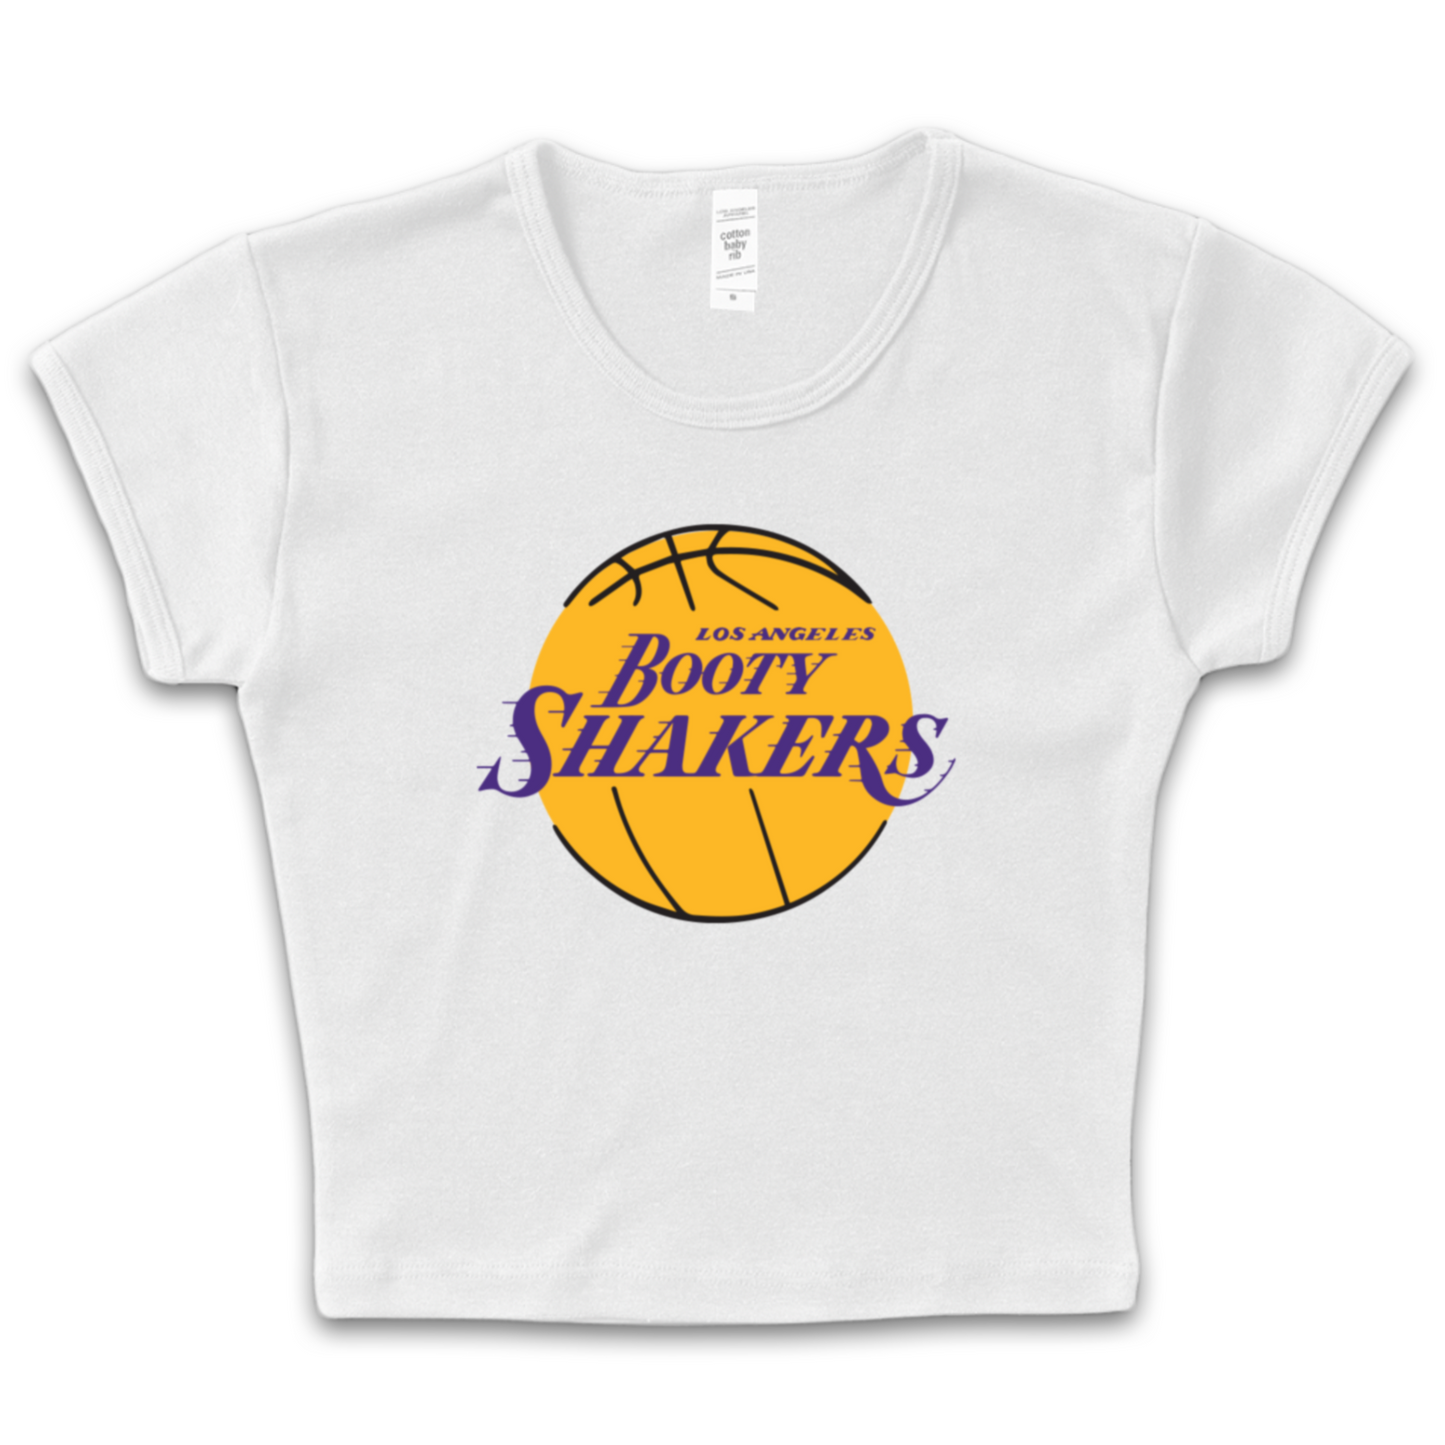 Los Angeles Booty Shakers Baby Tee